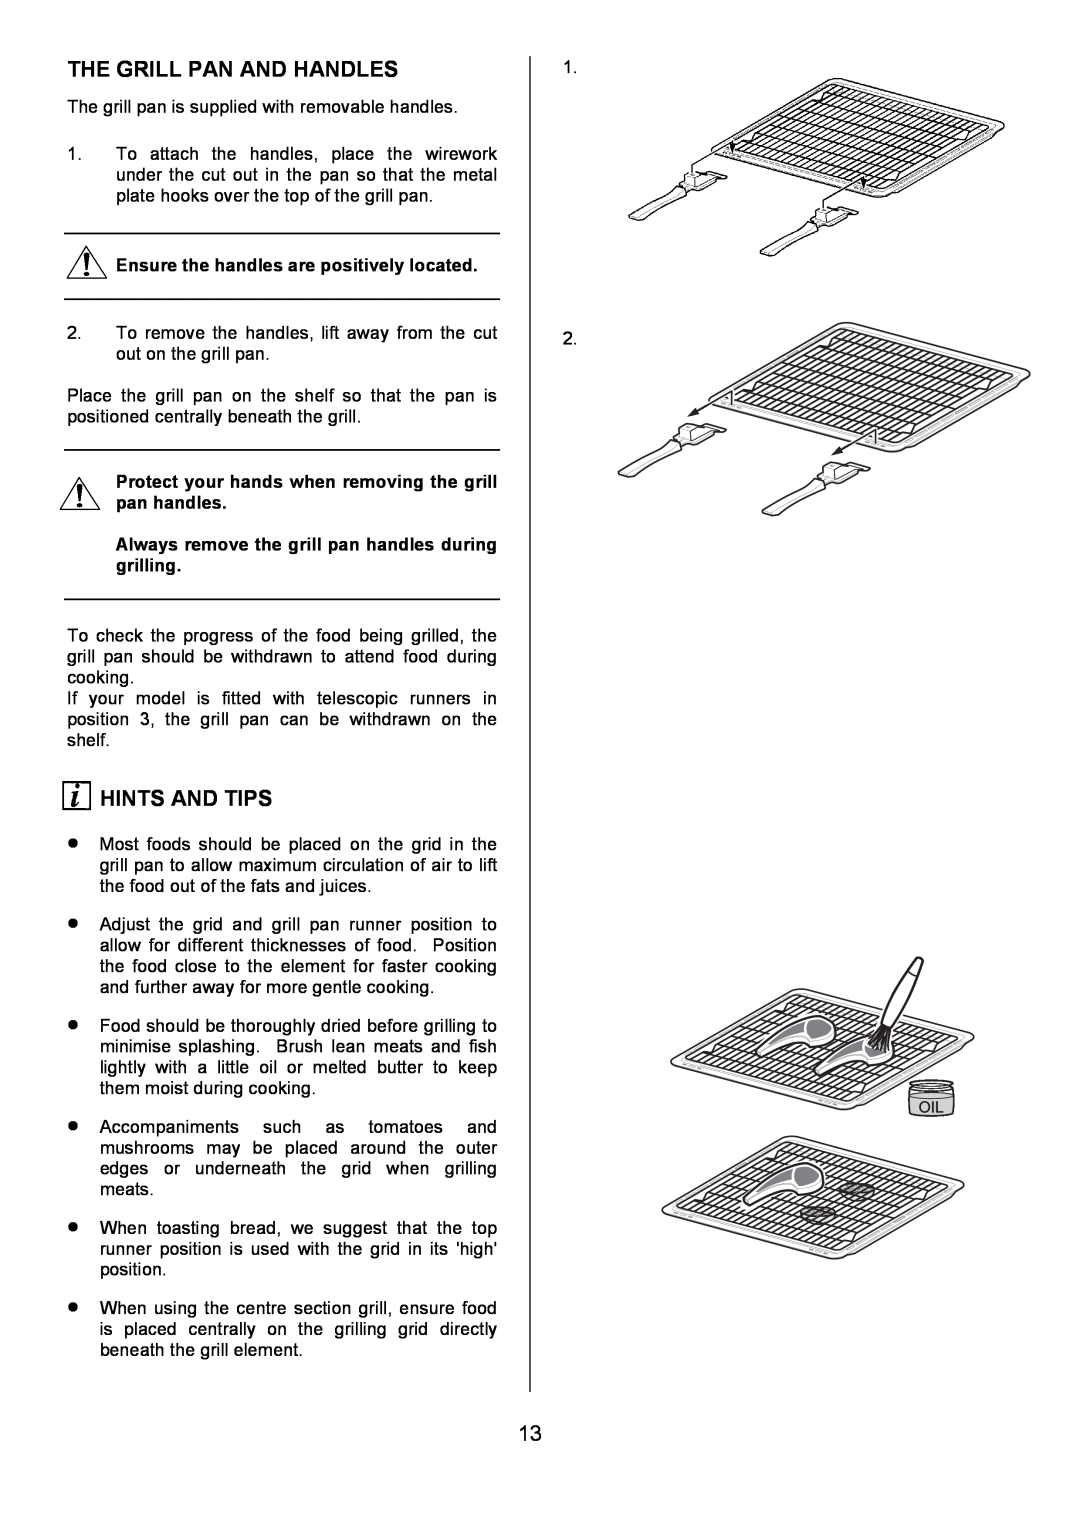 Electrolux D4101-4 operating instructions The Grill Pan And Handles, Hints And Tips 